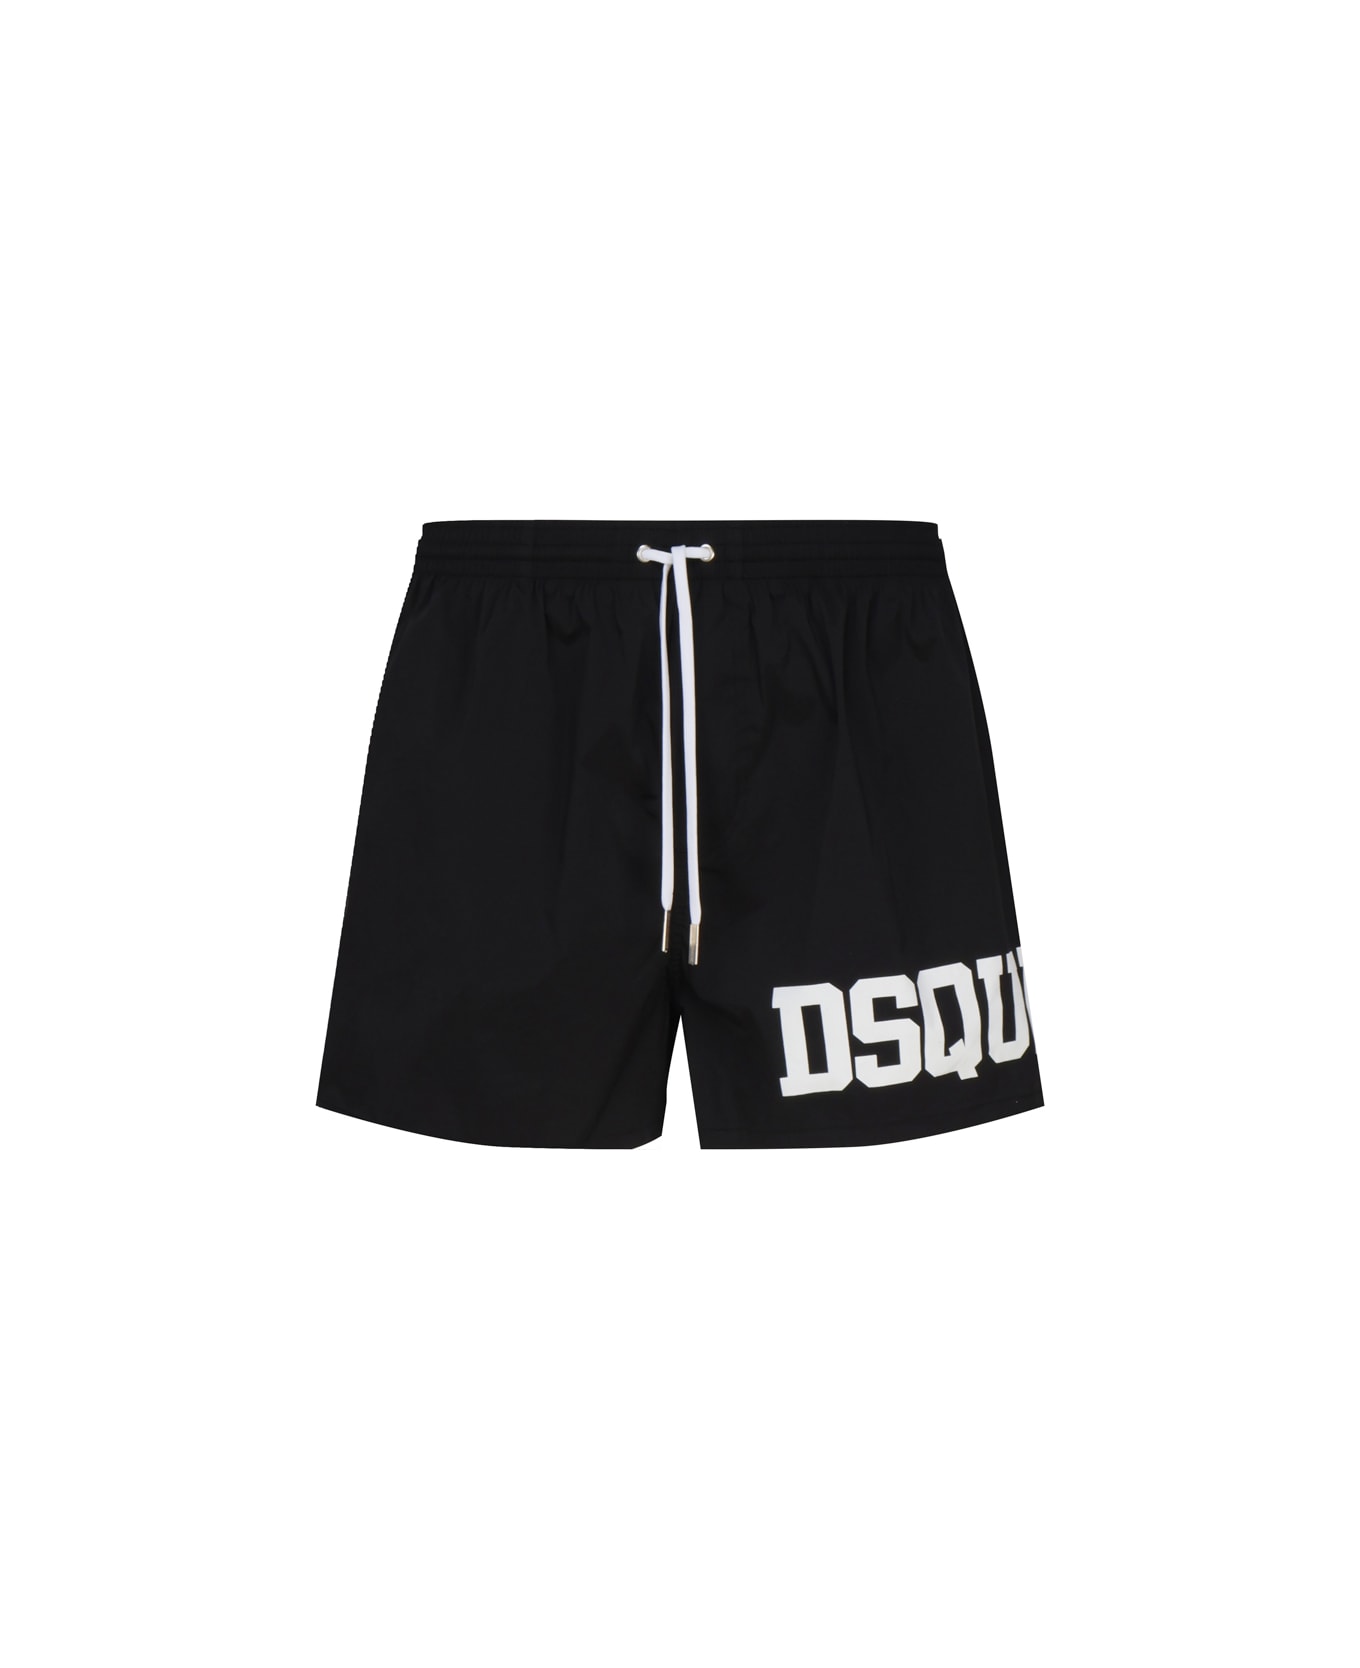 Dsquared2 Logo Swimsuit In Contrasting Color - Black/white 水着